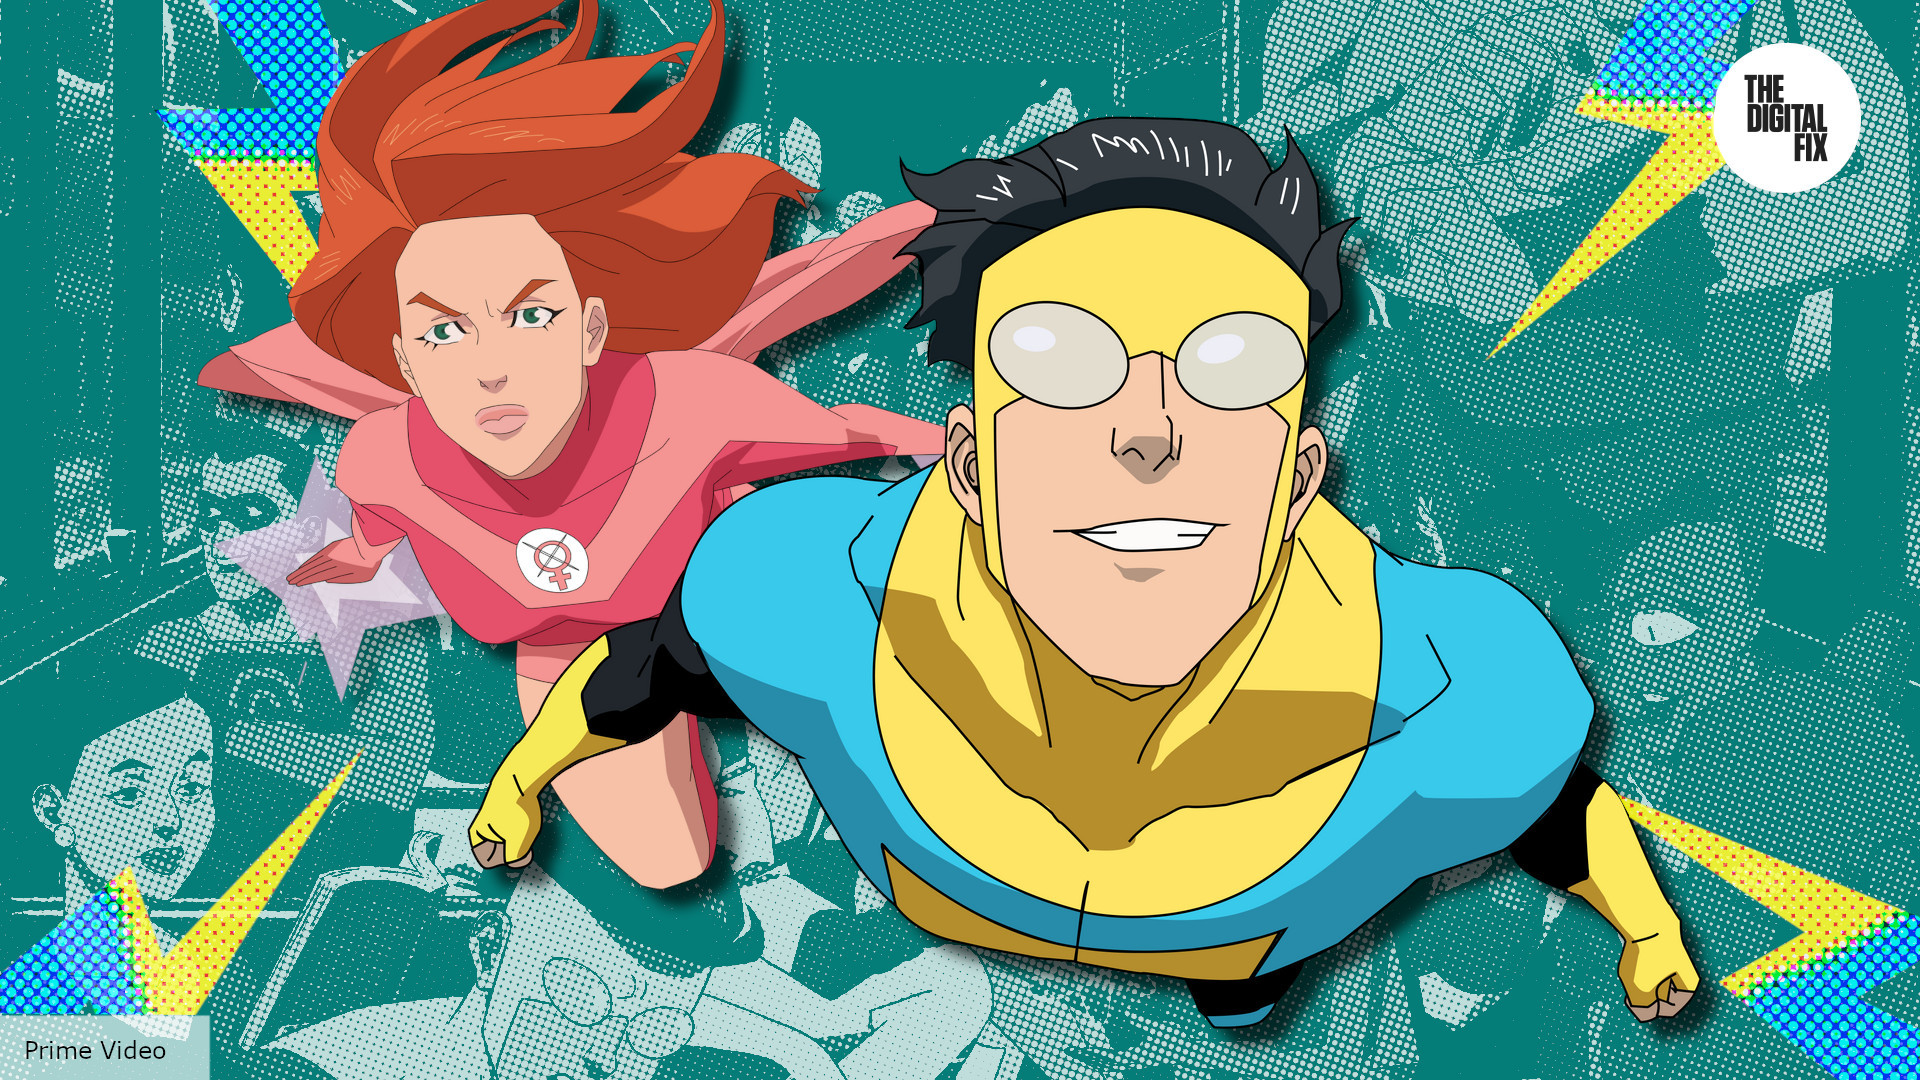 Invincible Season 2 Episode 5 Release, Story Details & Everything We Know